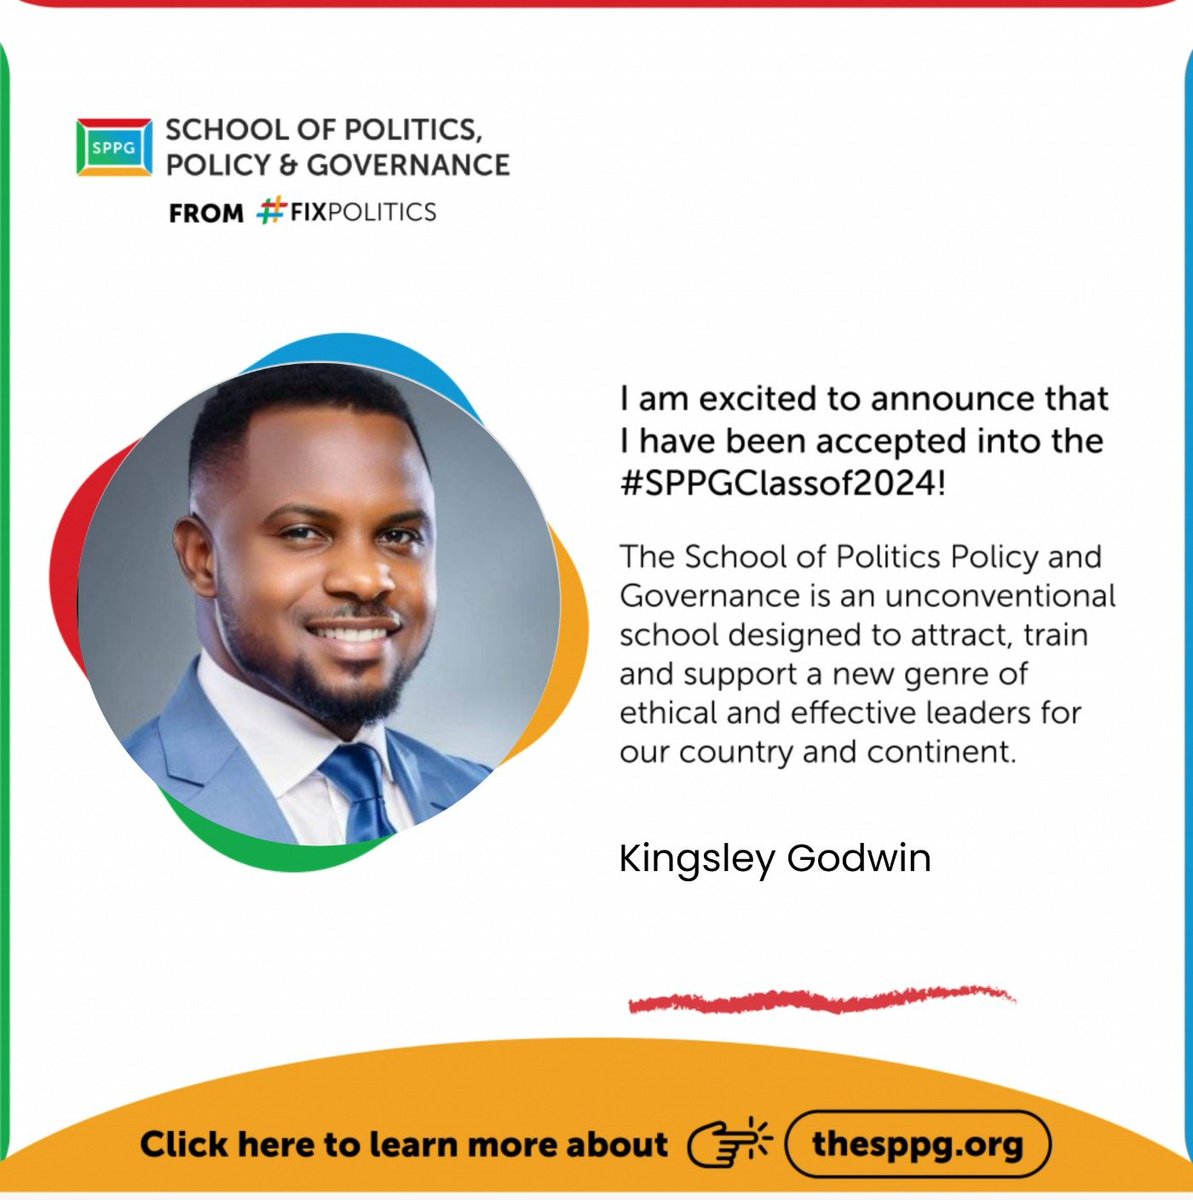 As an emerging leader advocating and driving policy reforms in governance through @wideflive I am excited to join the School of Politics, Policy and Governance 🎓🌟

Looking forward to a transformative learning experience #Politics #Policy #Governance #SPPGClassof2024.